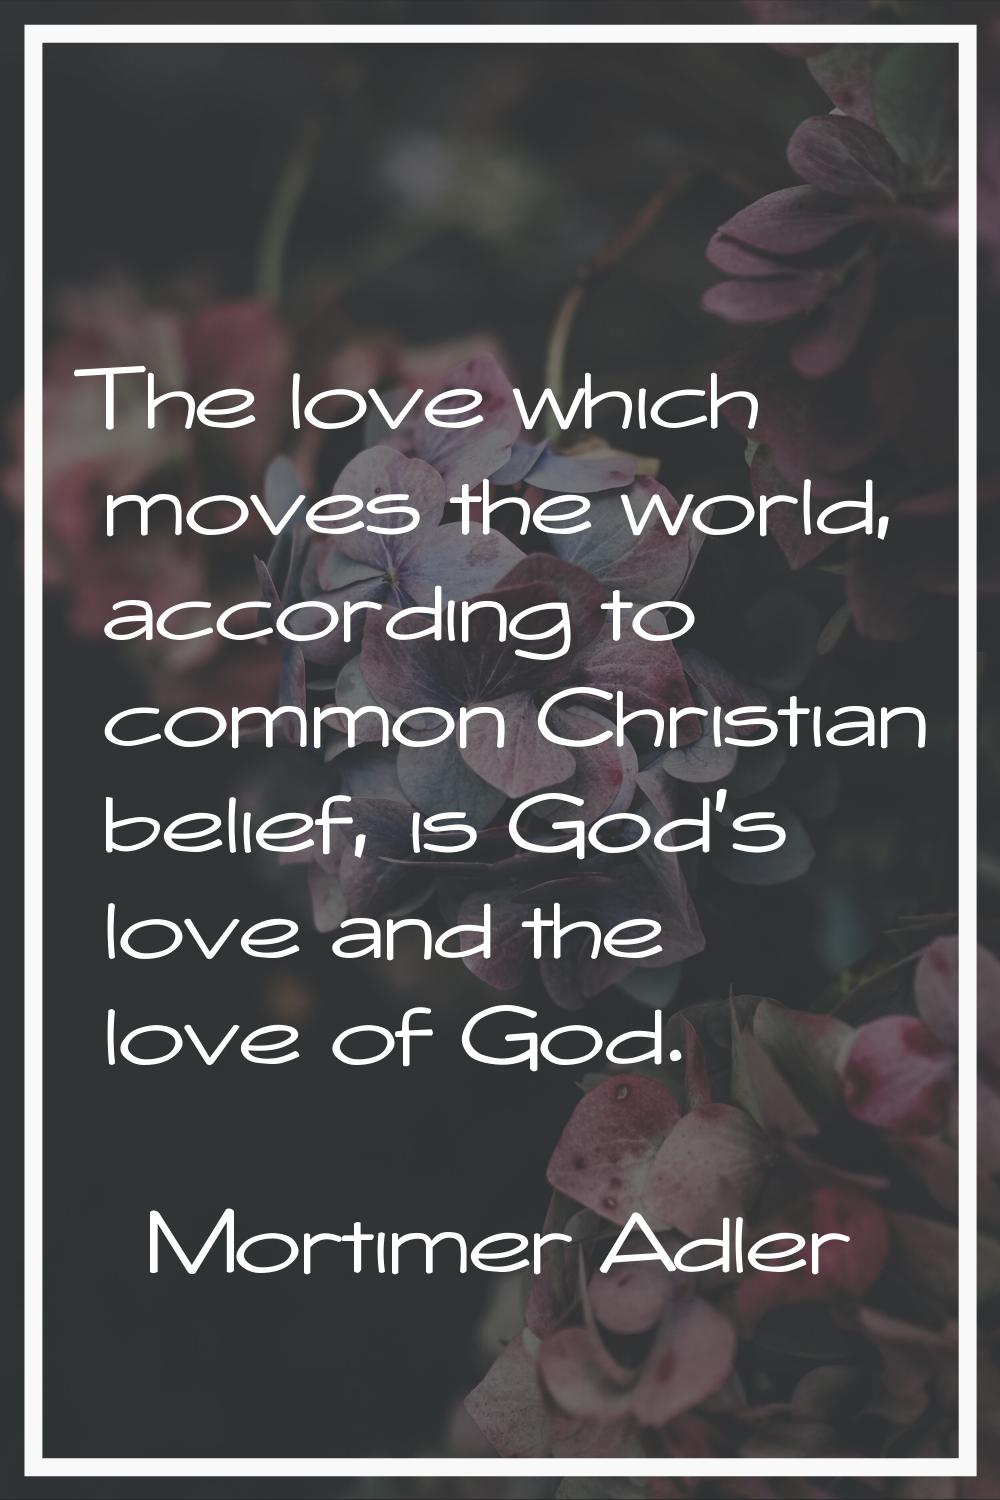 The love which moves the world, according to common Christian belief, is God's love and the love of